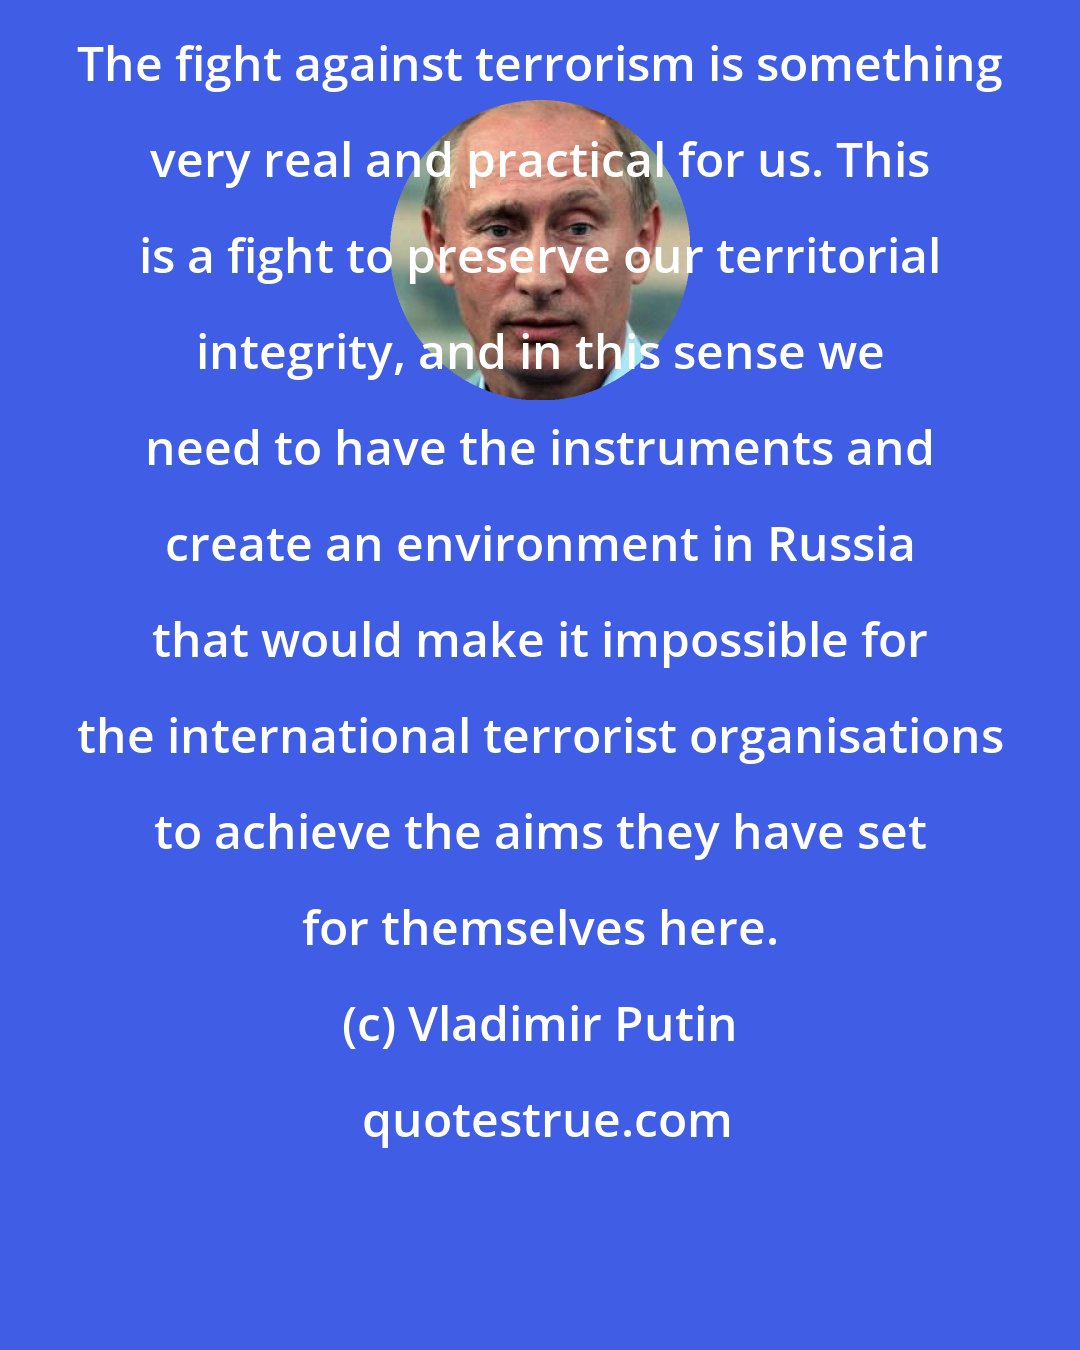 Vladimir Putin: The fight against terrorism is something very real and practical for us. This is a fight to preserve our territorial integrity, and in this sense we need to have the instruments and create an environment in Russia that would make it impossible for the international terrorist organisations to achieve the aims they have set for themselves here.